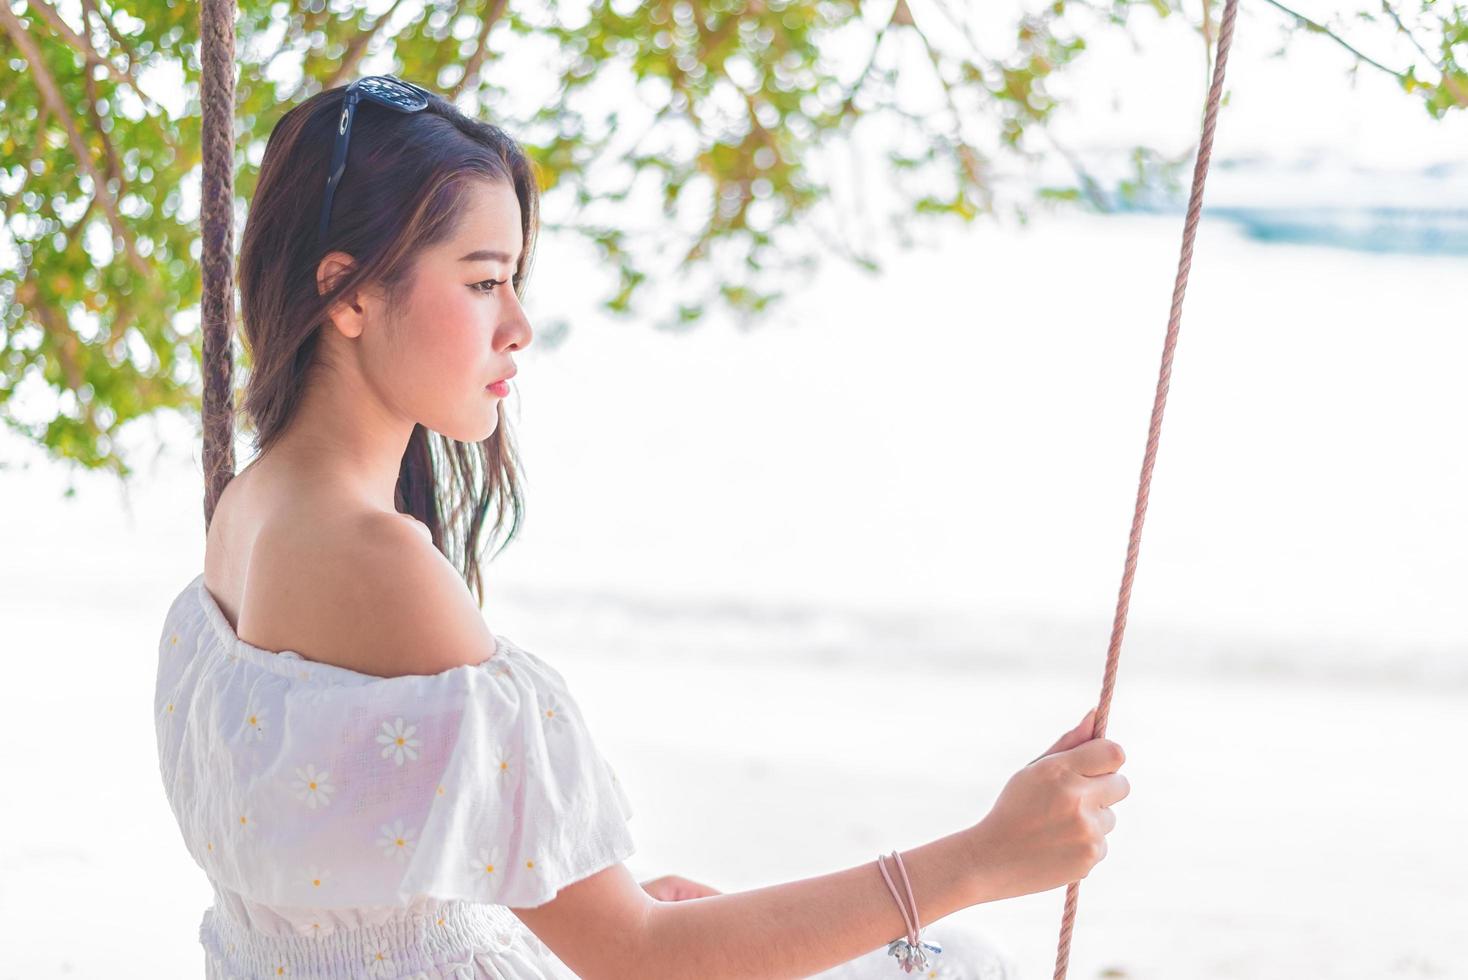 Asian woman on white dress sitting on swing at beach. People and Nature concept. Sad love and Missing someone concept. Lonely and Heart broken theme photo